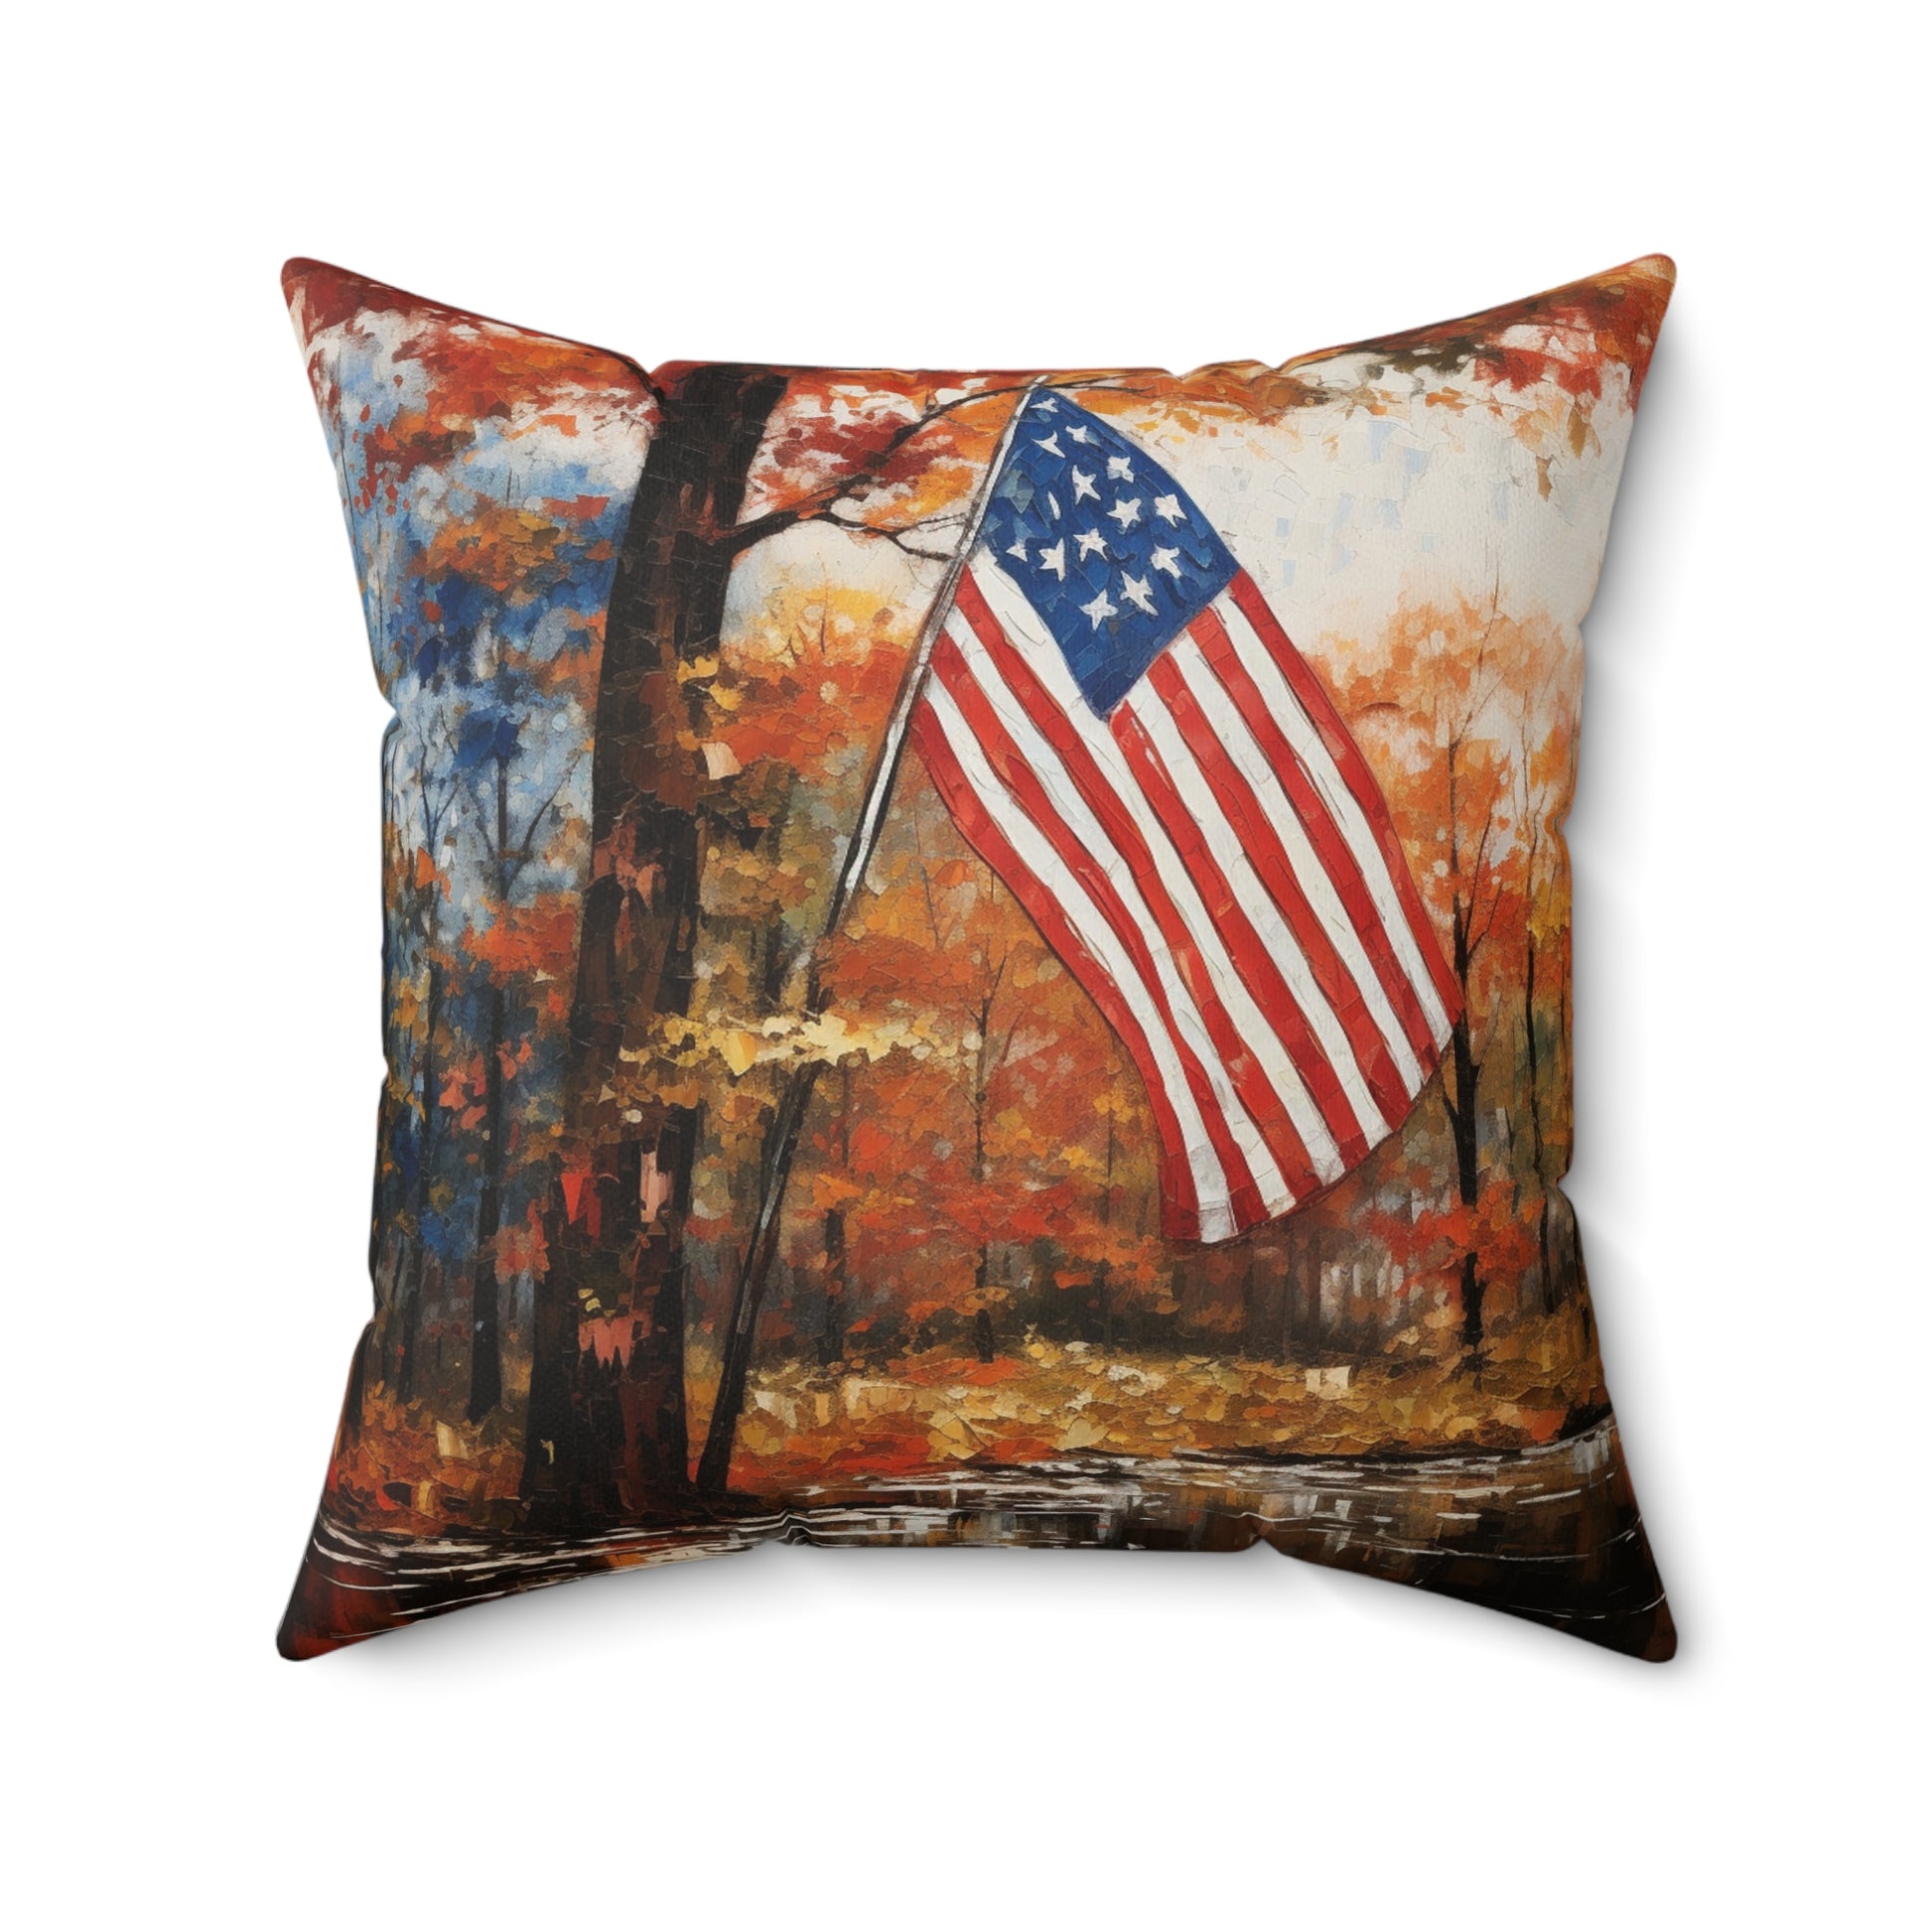 American flag pillow - Weave Got Gifts - Unique Gifts You Won’t Find Anywhere Else!